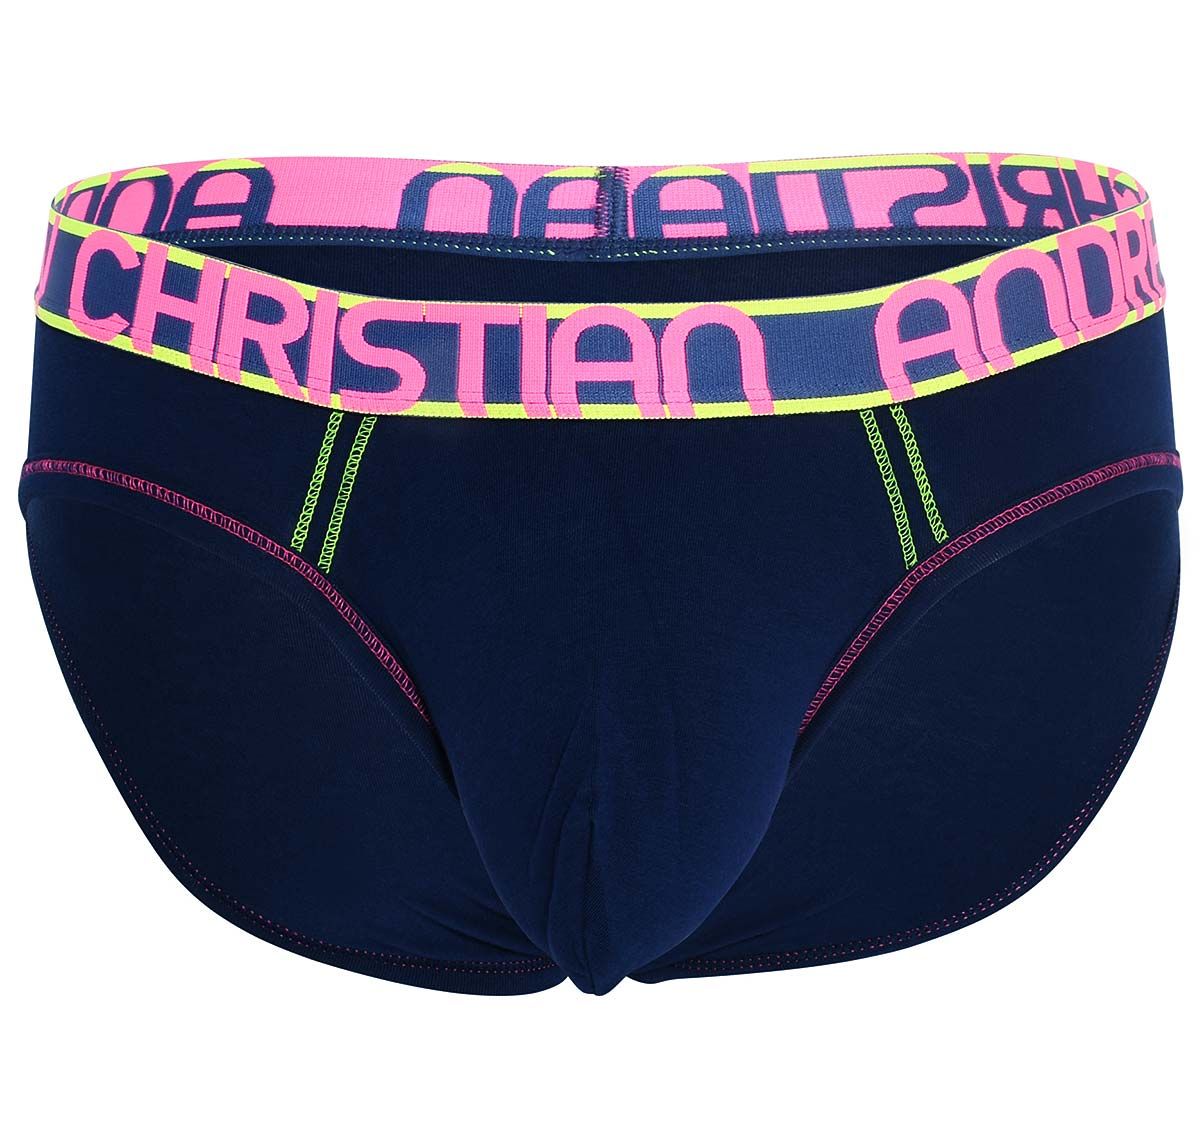 Andrew Christian Slip ALMOST NAKED COTTON BRIEF 92182, blu navy